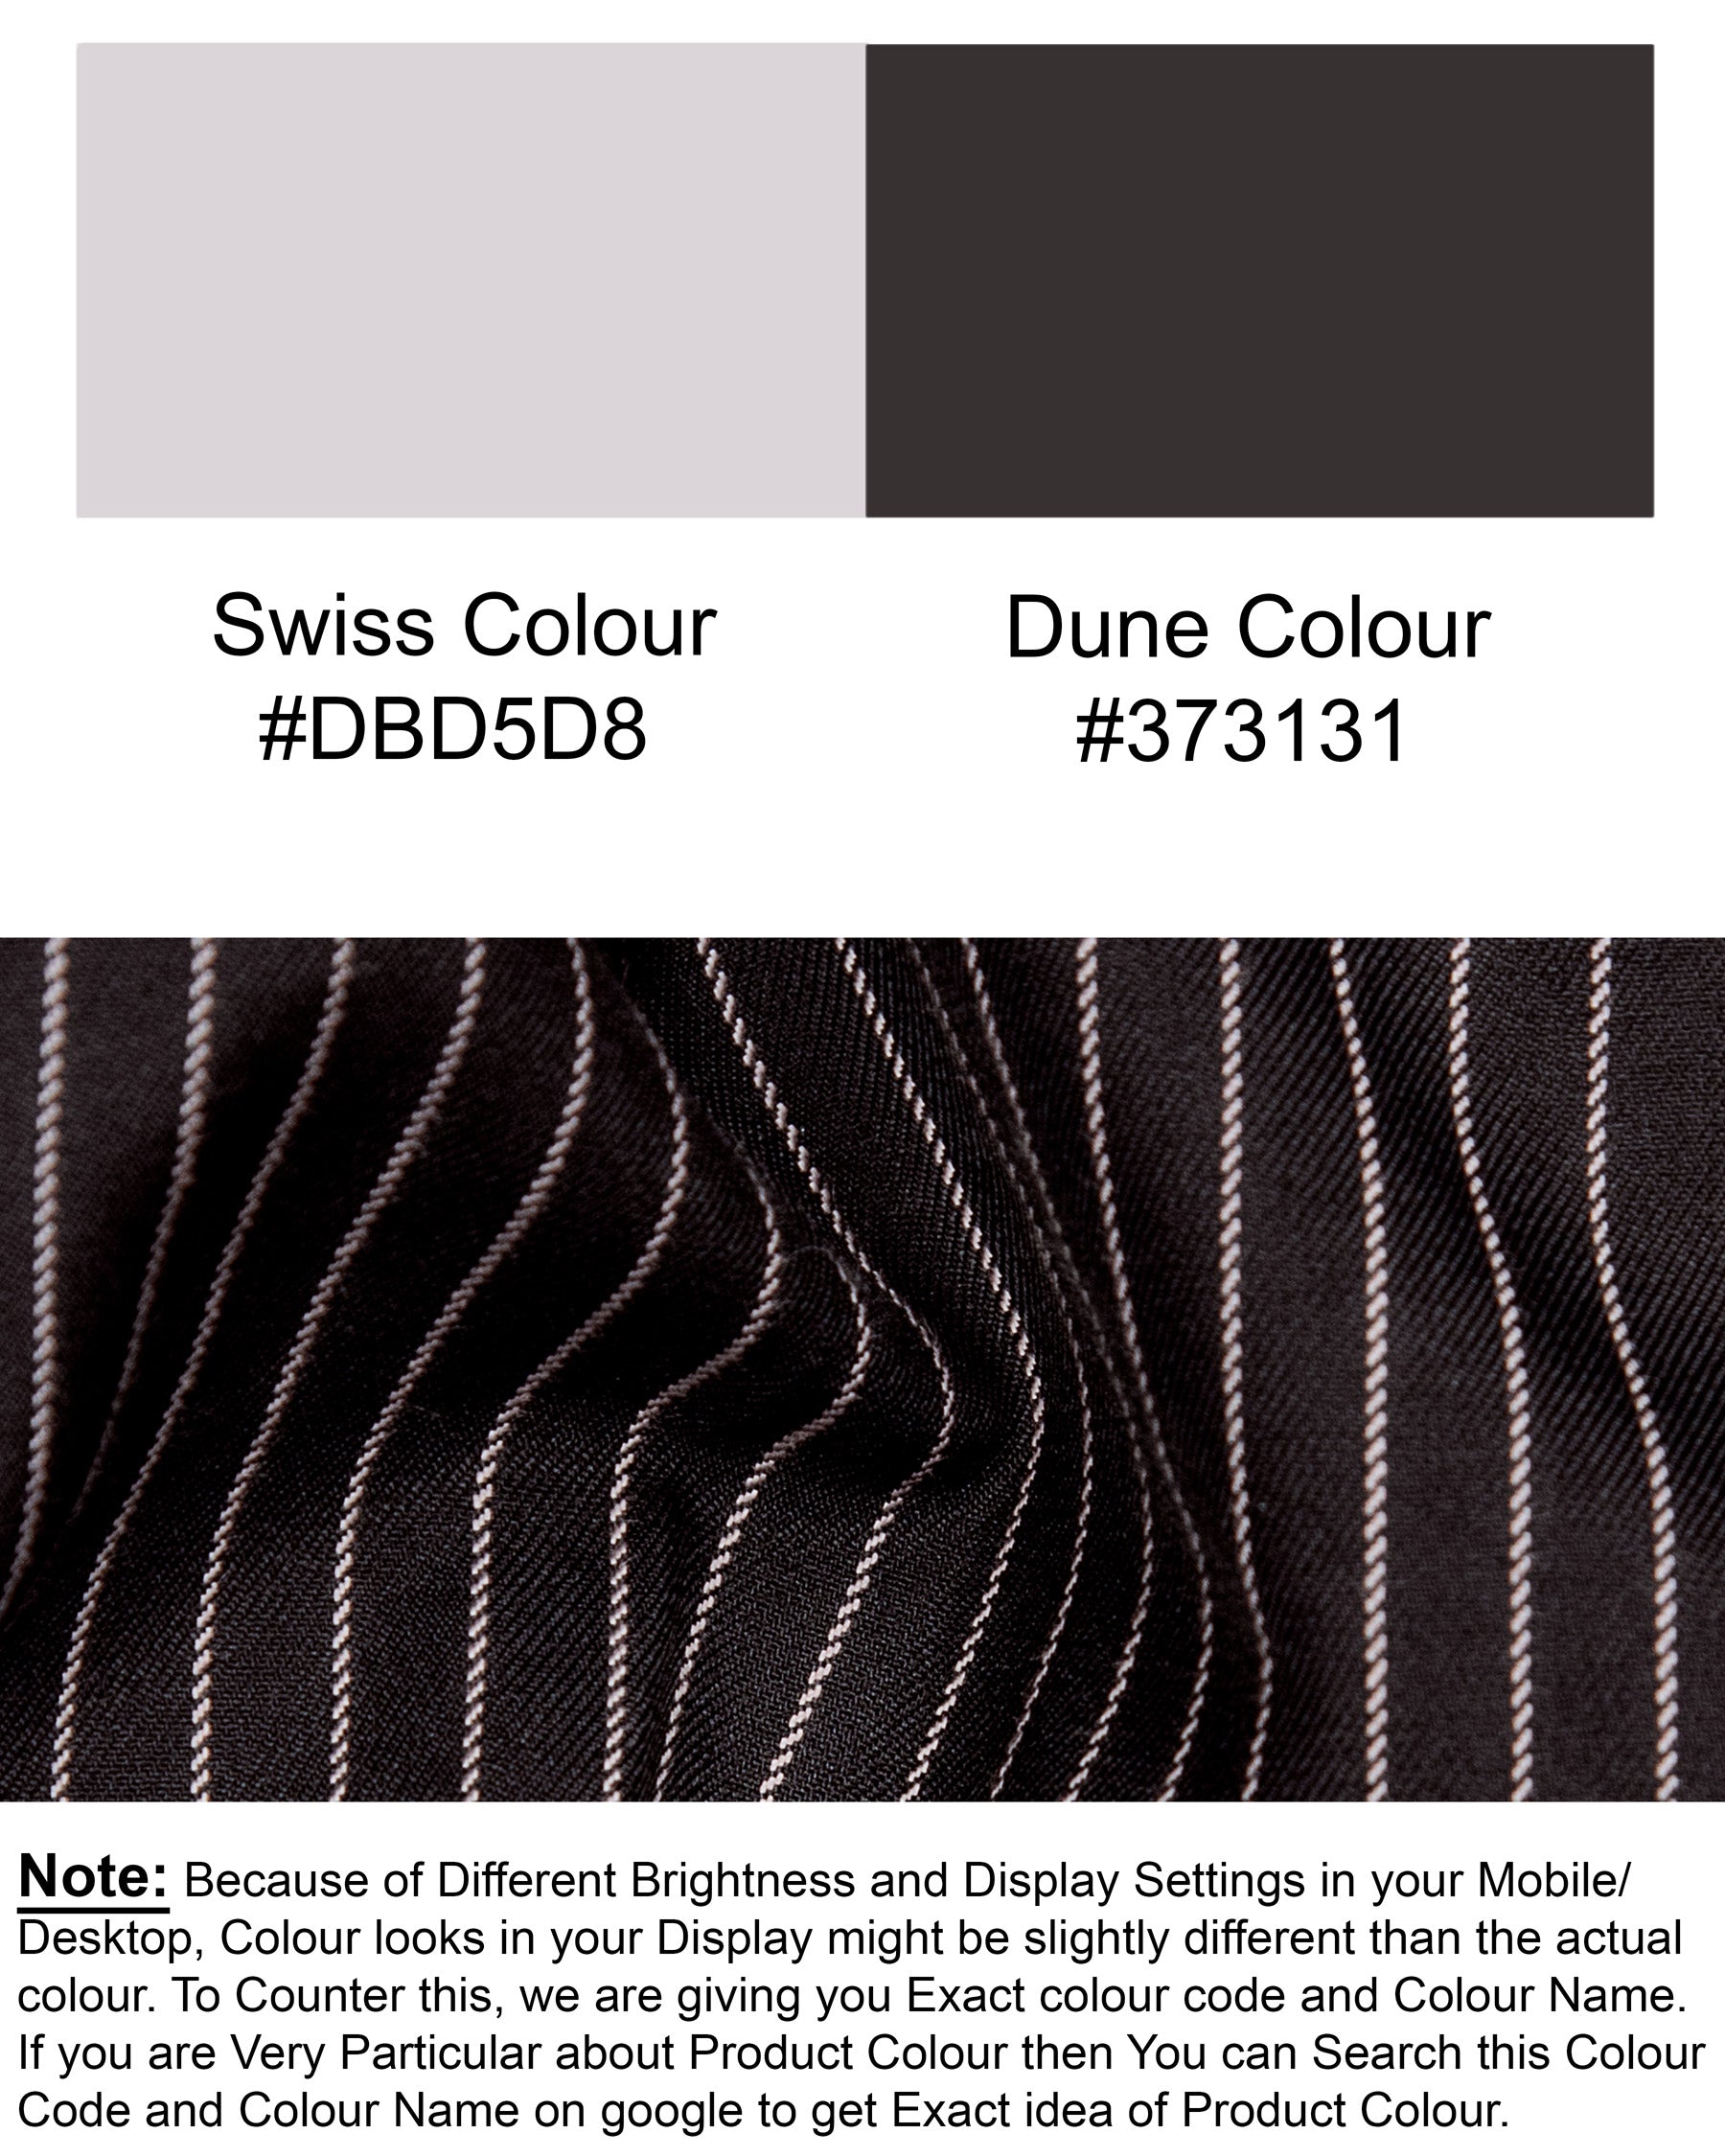 Dune with Swiss Grey Striped Wool Rich Suit ST1301-SB-36, ST1301-SB-38, ST1301-SB-40, ST1301-SB-42, ST1301-SB-44, ST1301-SB-50, ST1301-SB-52, ST1301-SB-54, ST1301-SB-56, ST1301-SB-46, ST1301-SB-48, ST1301-SB-58, ST1301-SB-60